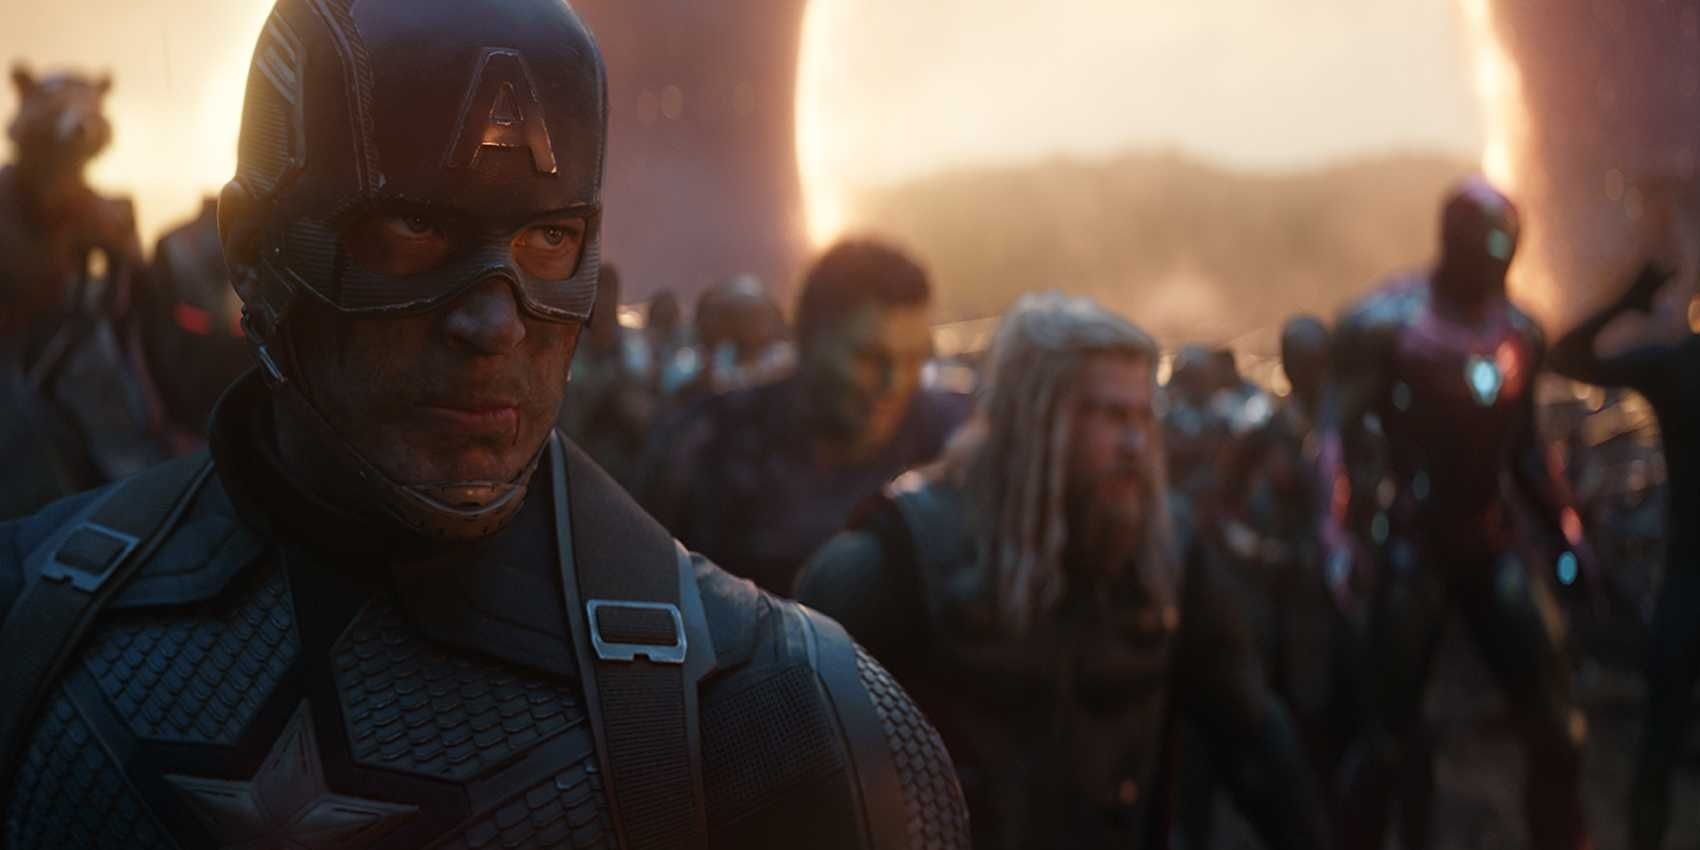 Avengers: Endgame Moment Gets Ported To Comics Print By Marvel